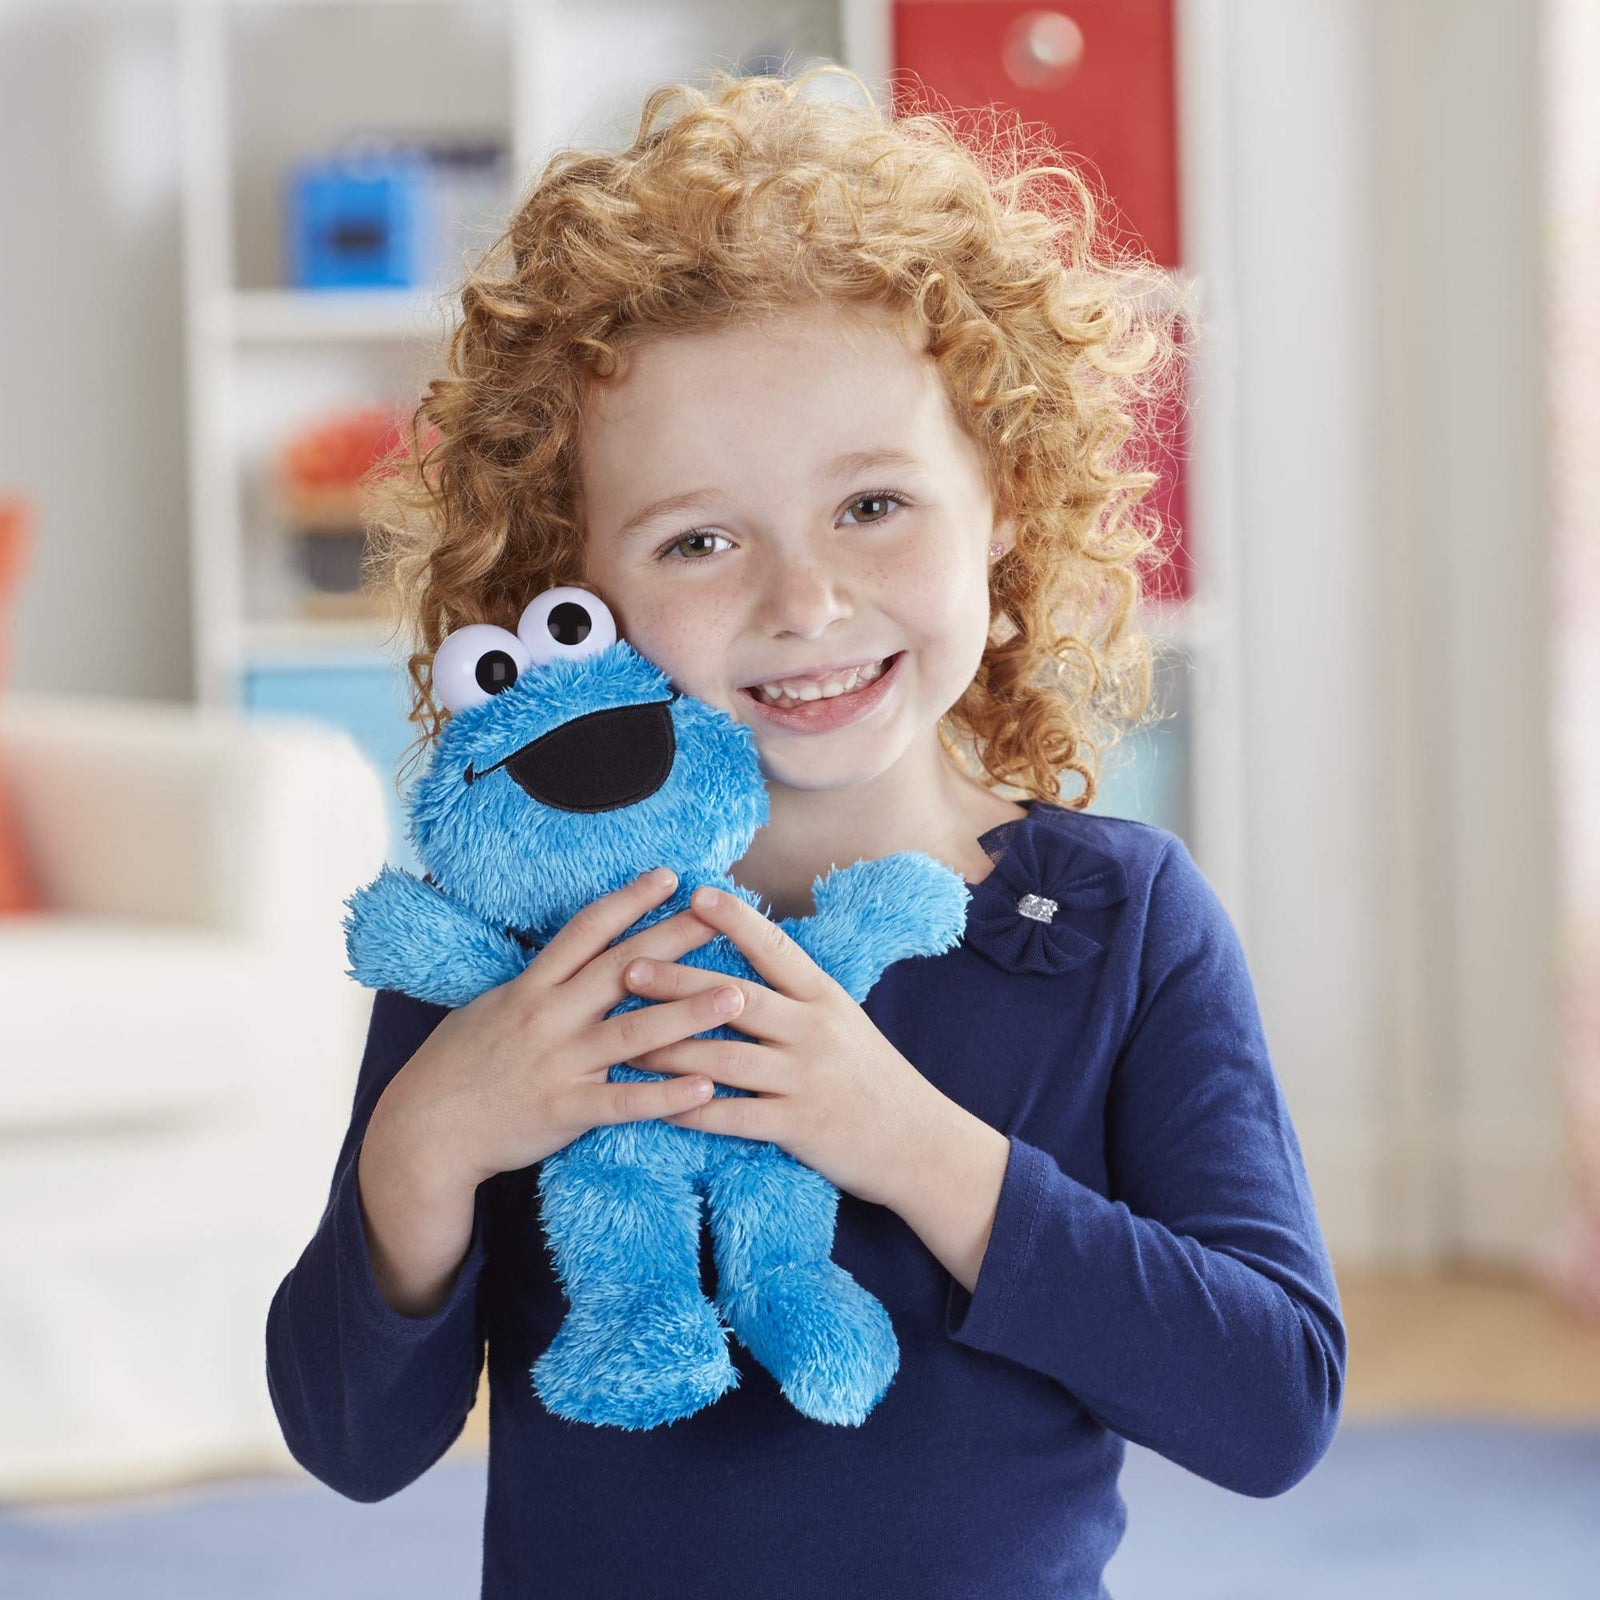 Sesame Street Little Laughs Tickle Me Cookie Monster, Talking, Laughing 10-Inch Plush Toy for Toddlers, Kids 12 Months and Up, 10 inches